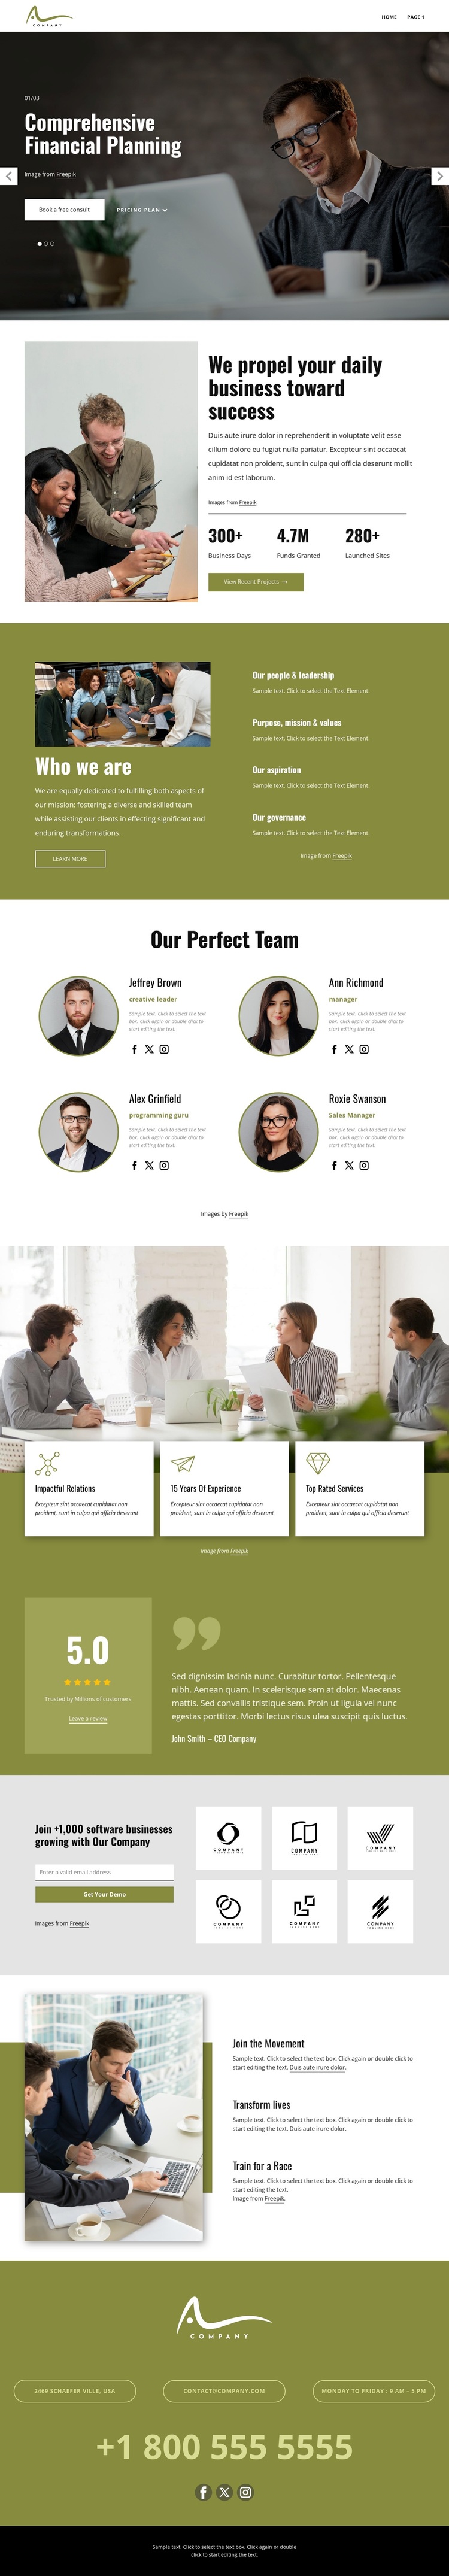 Strategic consulting solutions Template